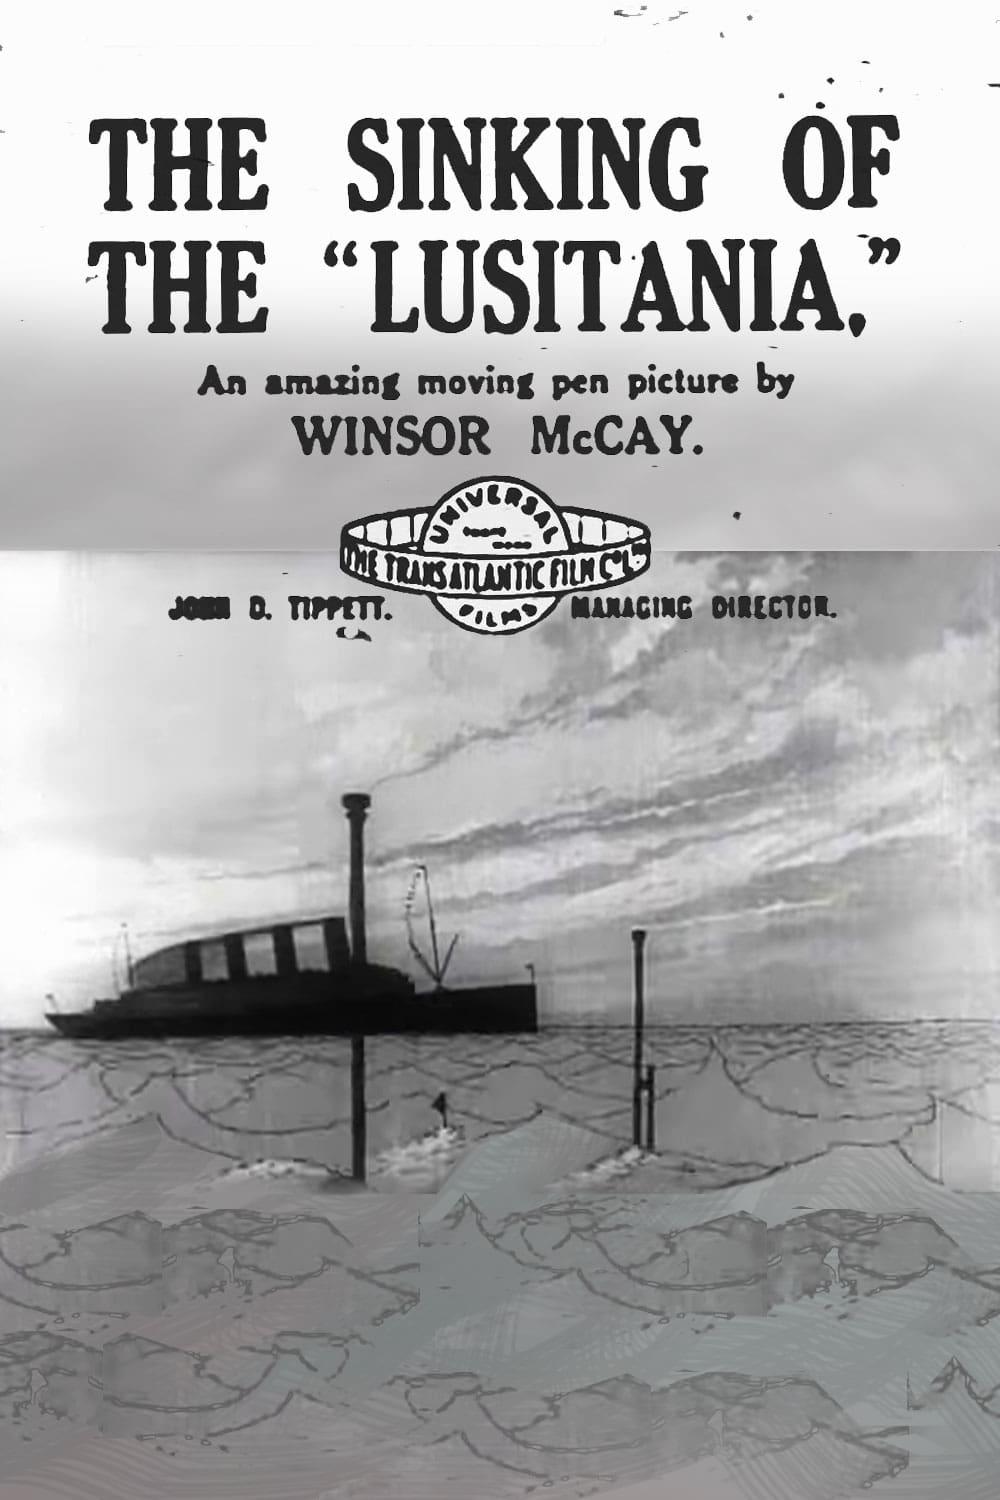 The Sinking of the Lusitania poster